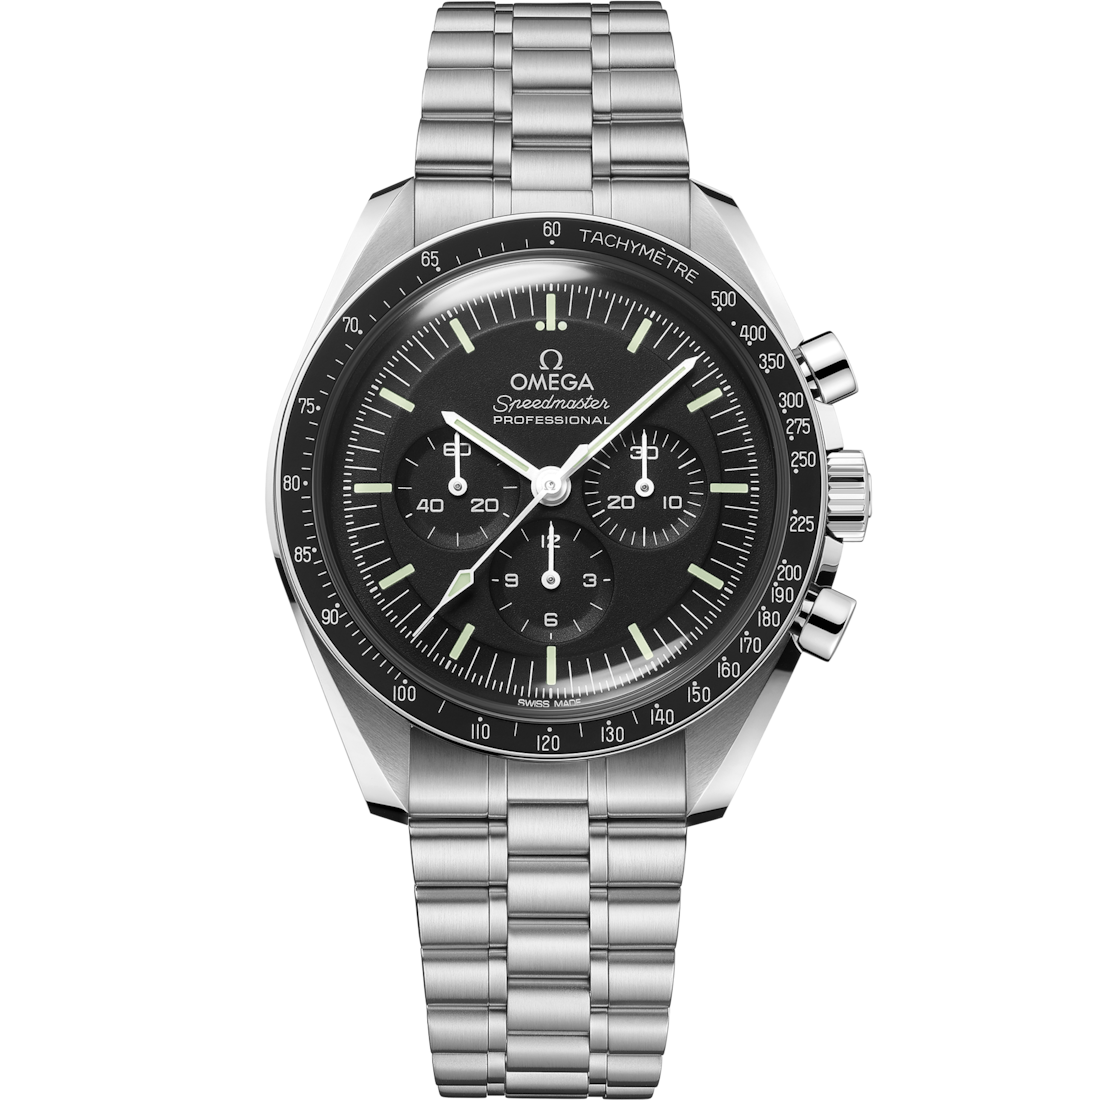 omega-speedmaster-moonwatch-professional-co-axial-master-chronometer-chronograph-42-mm-31030425001001-3ccf4a.png